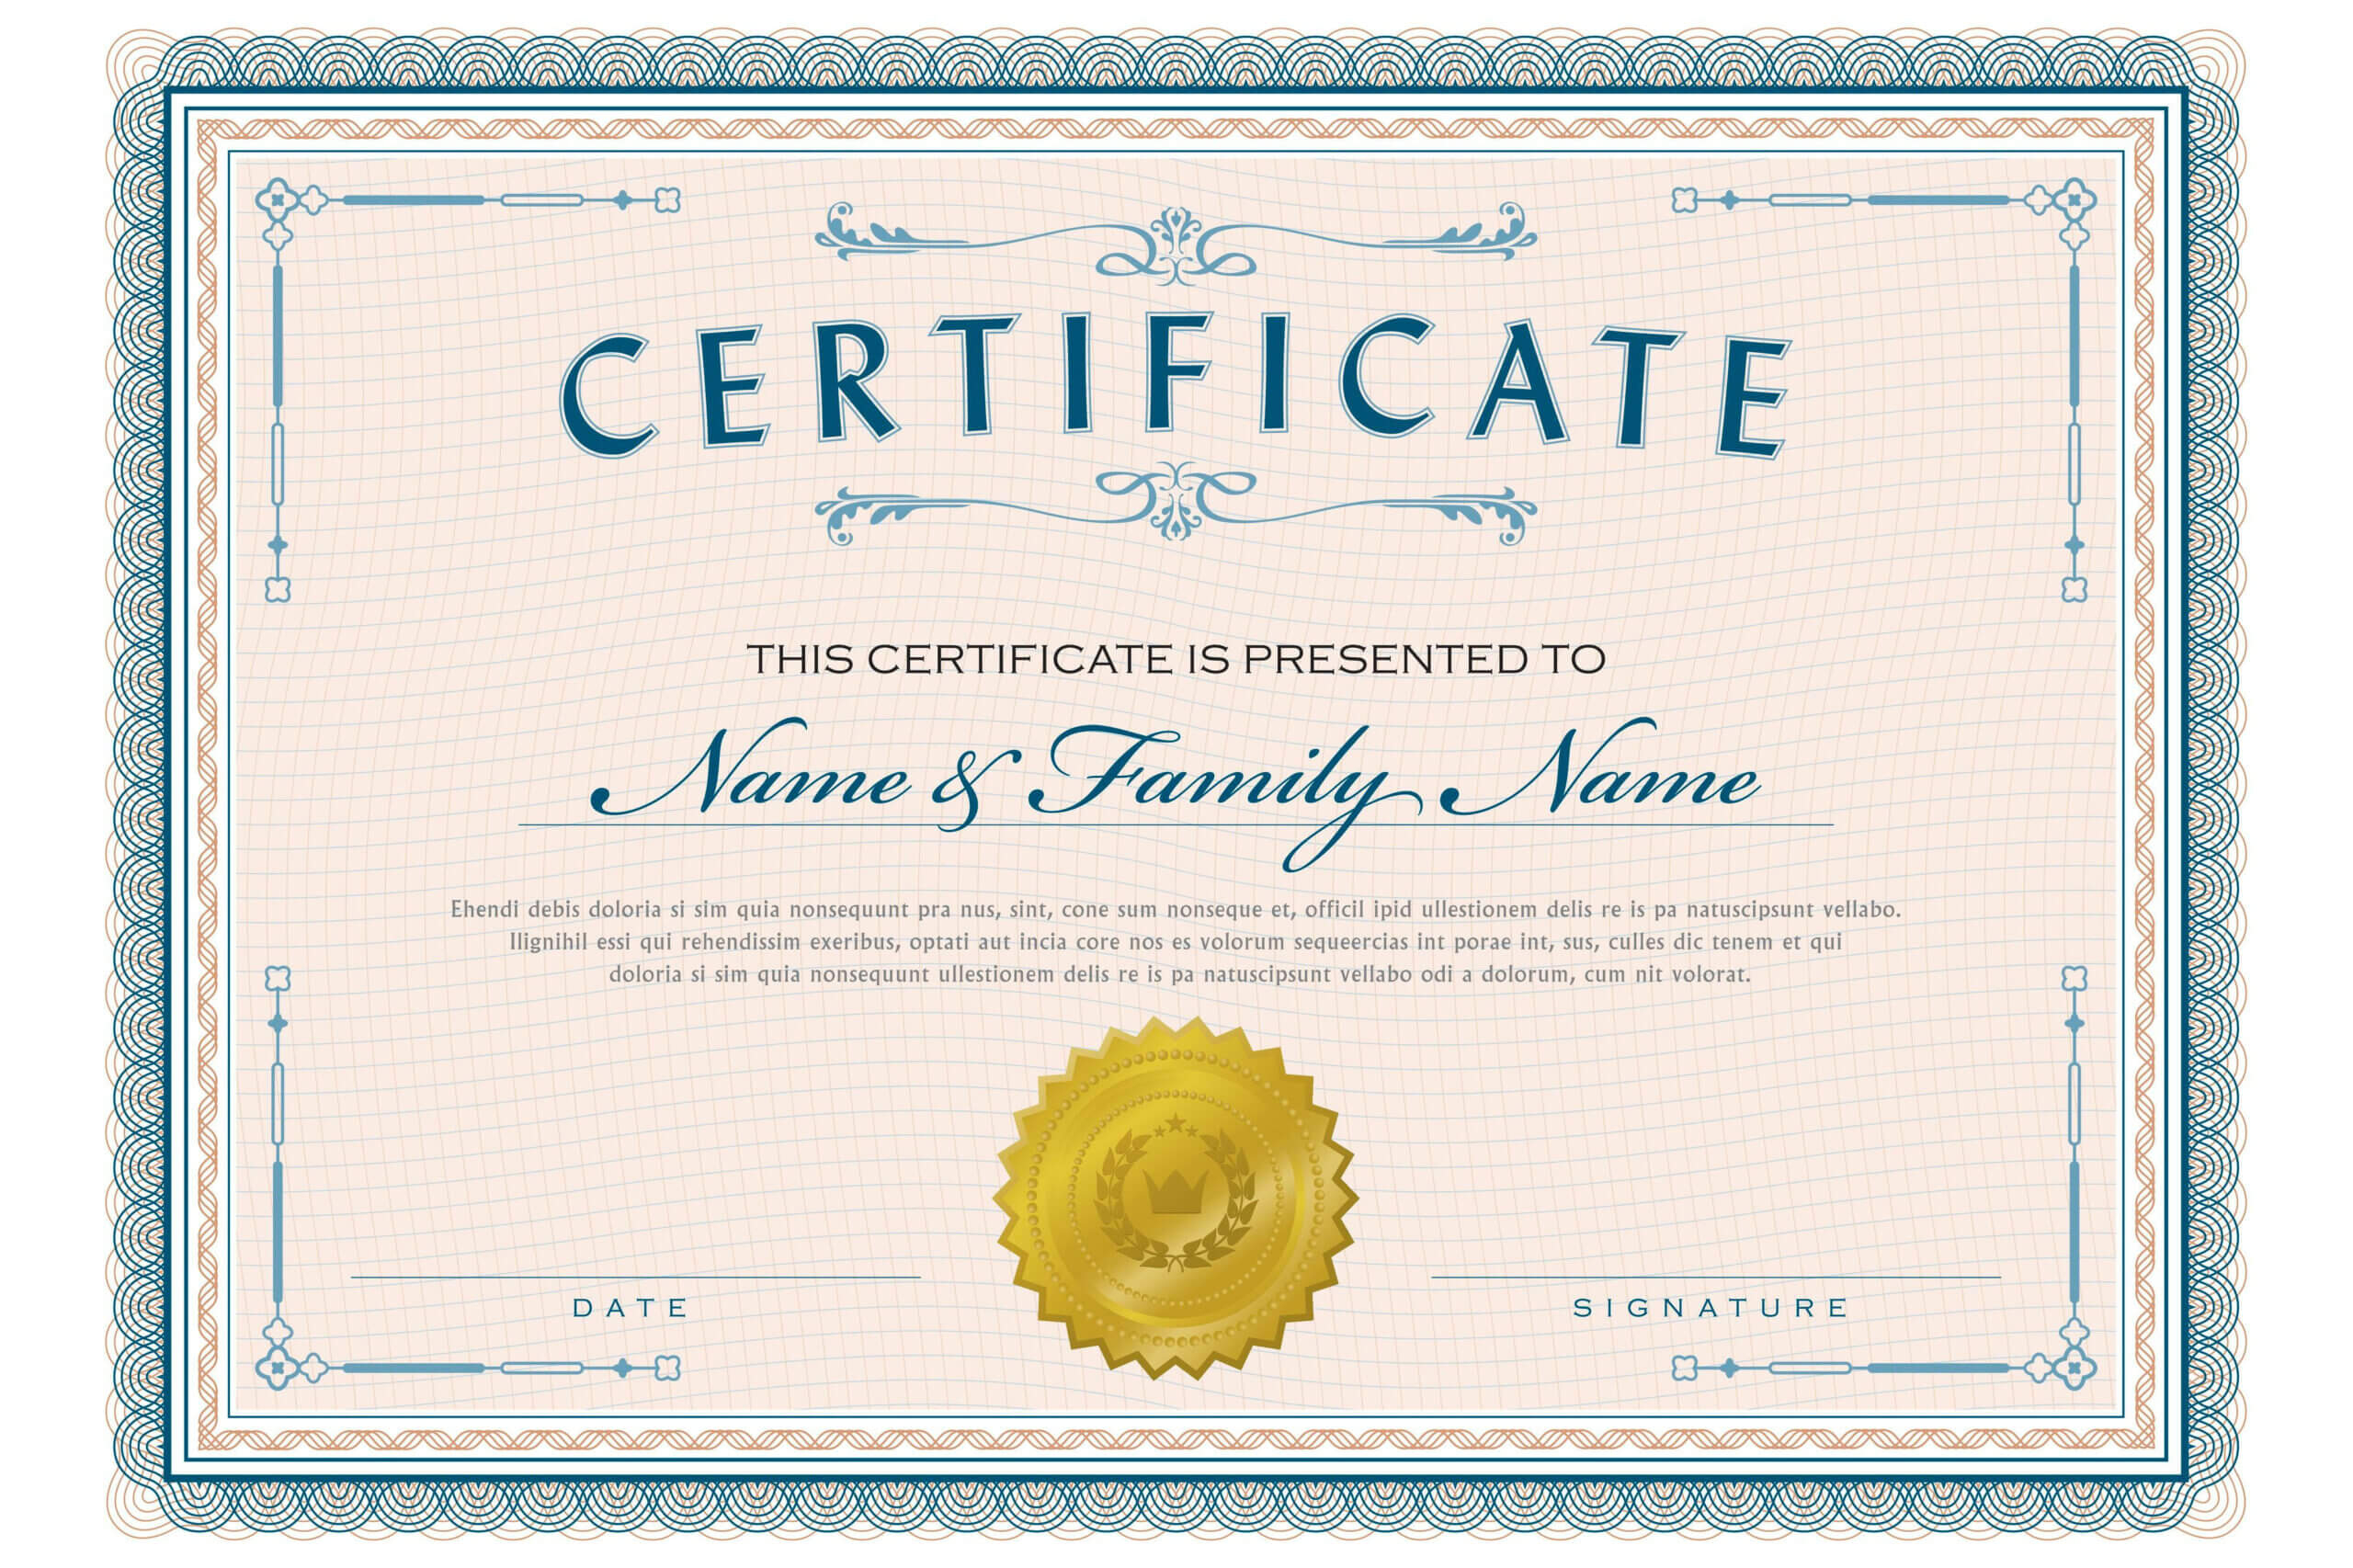 Necessary Parts Of An Award Certificate For Golf Certificate Templates with Golf Certificate Templates For Word